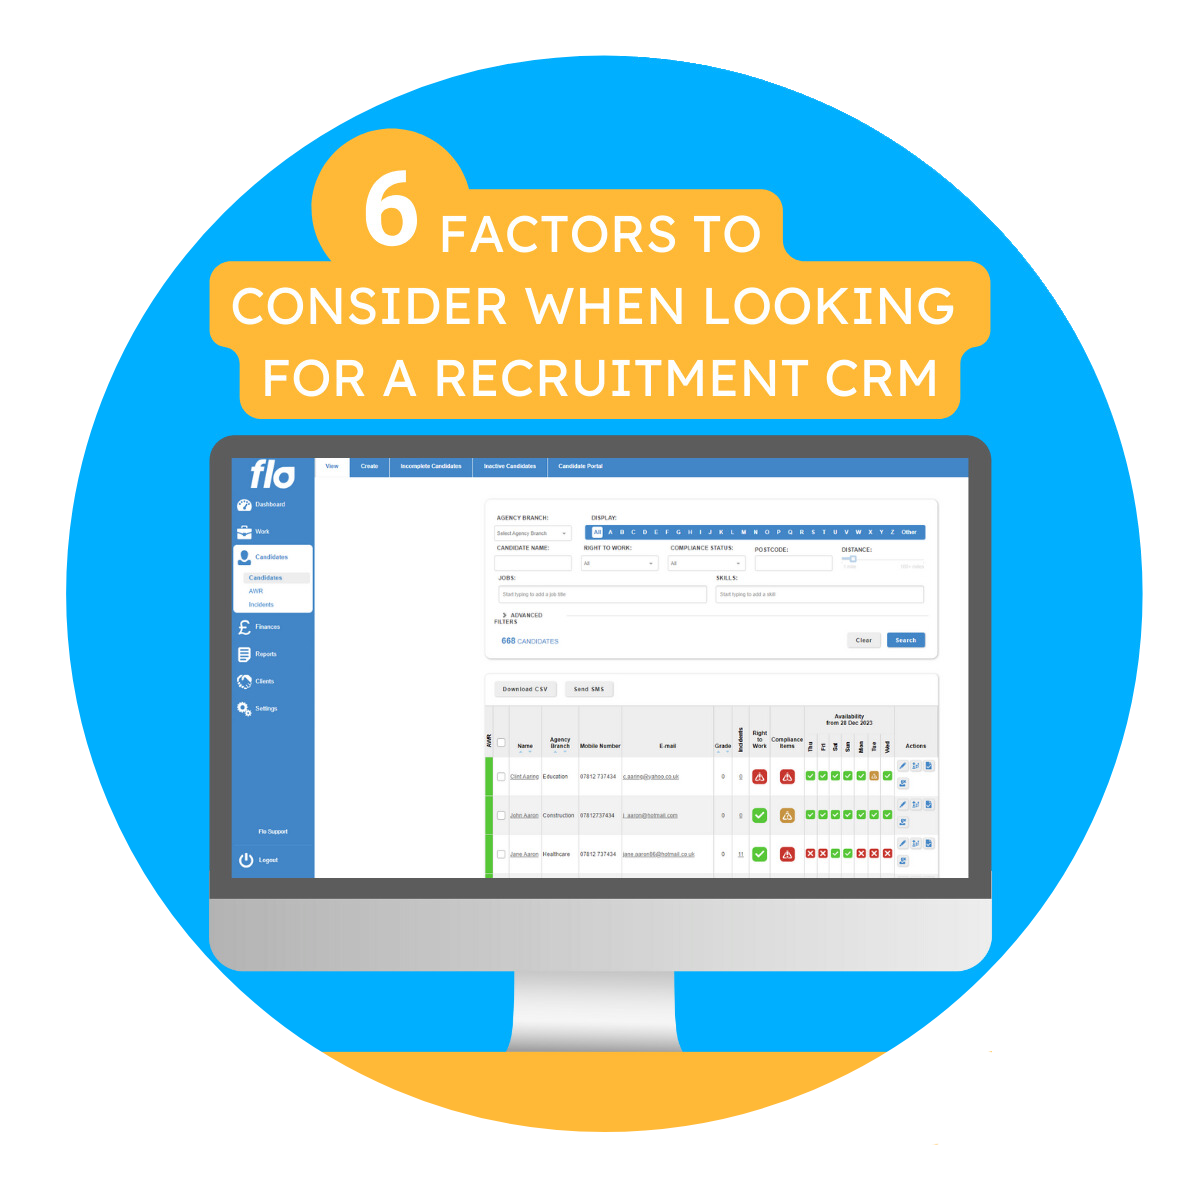 6 Factors to consider when looking for a recruitment CRM - Image